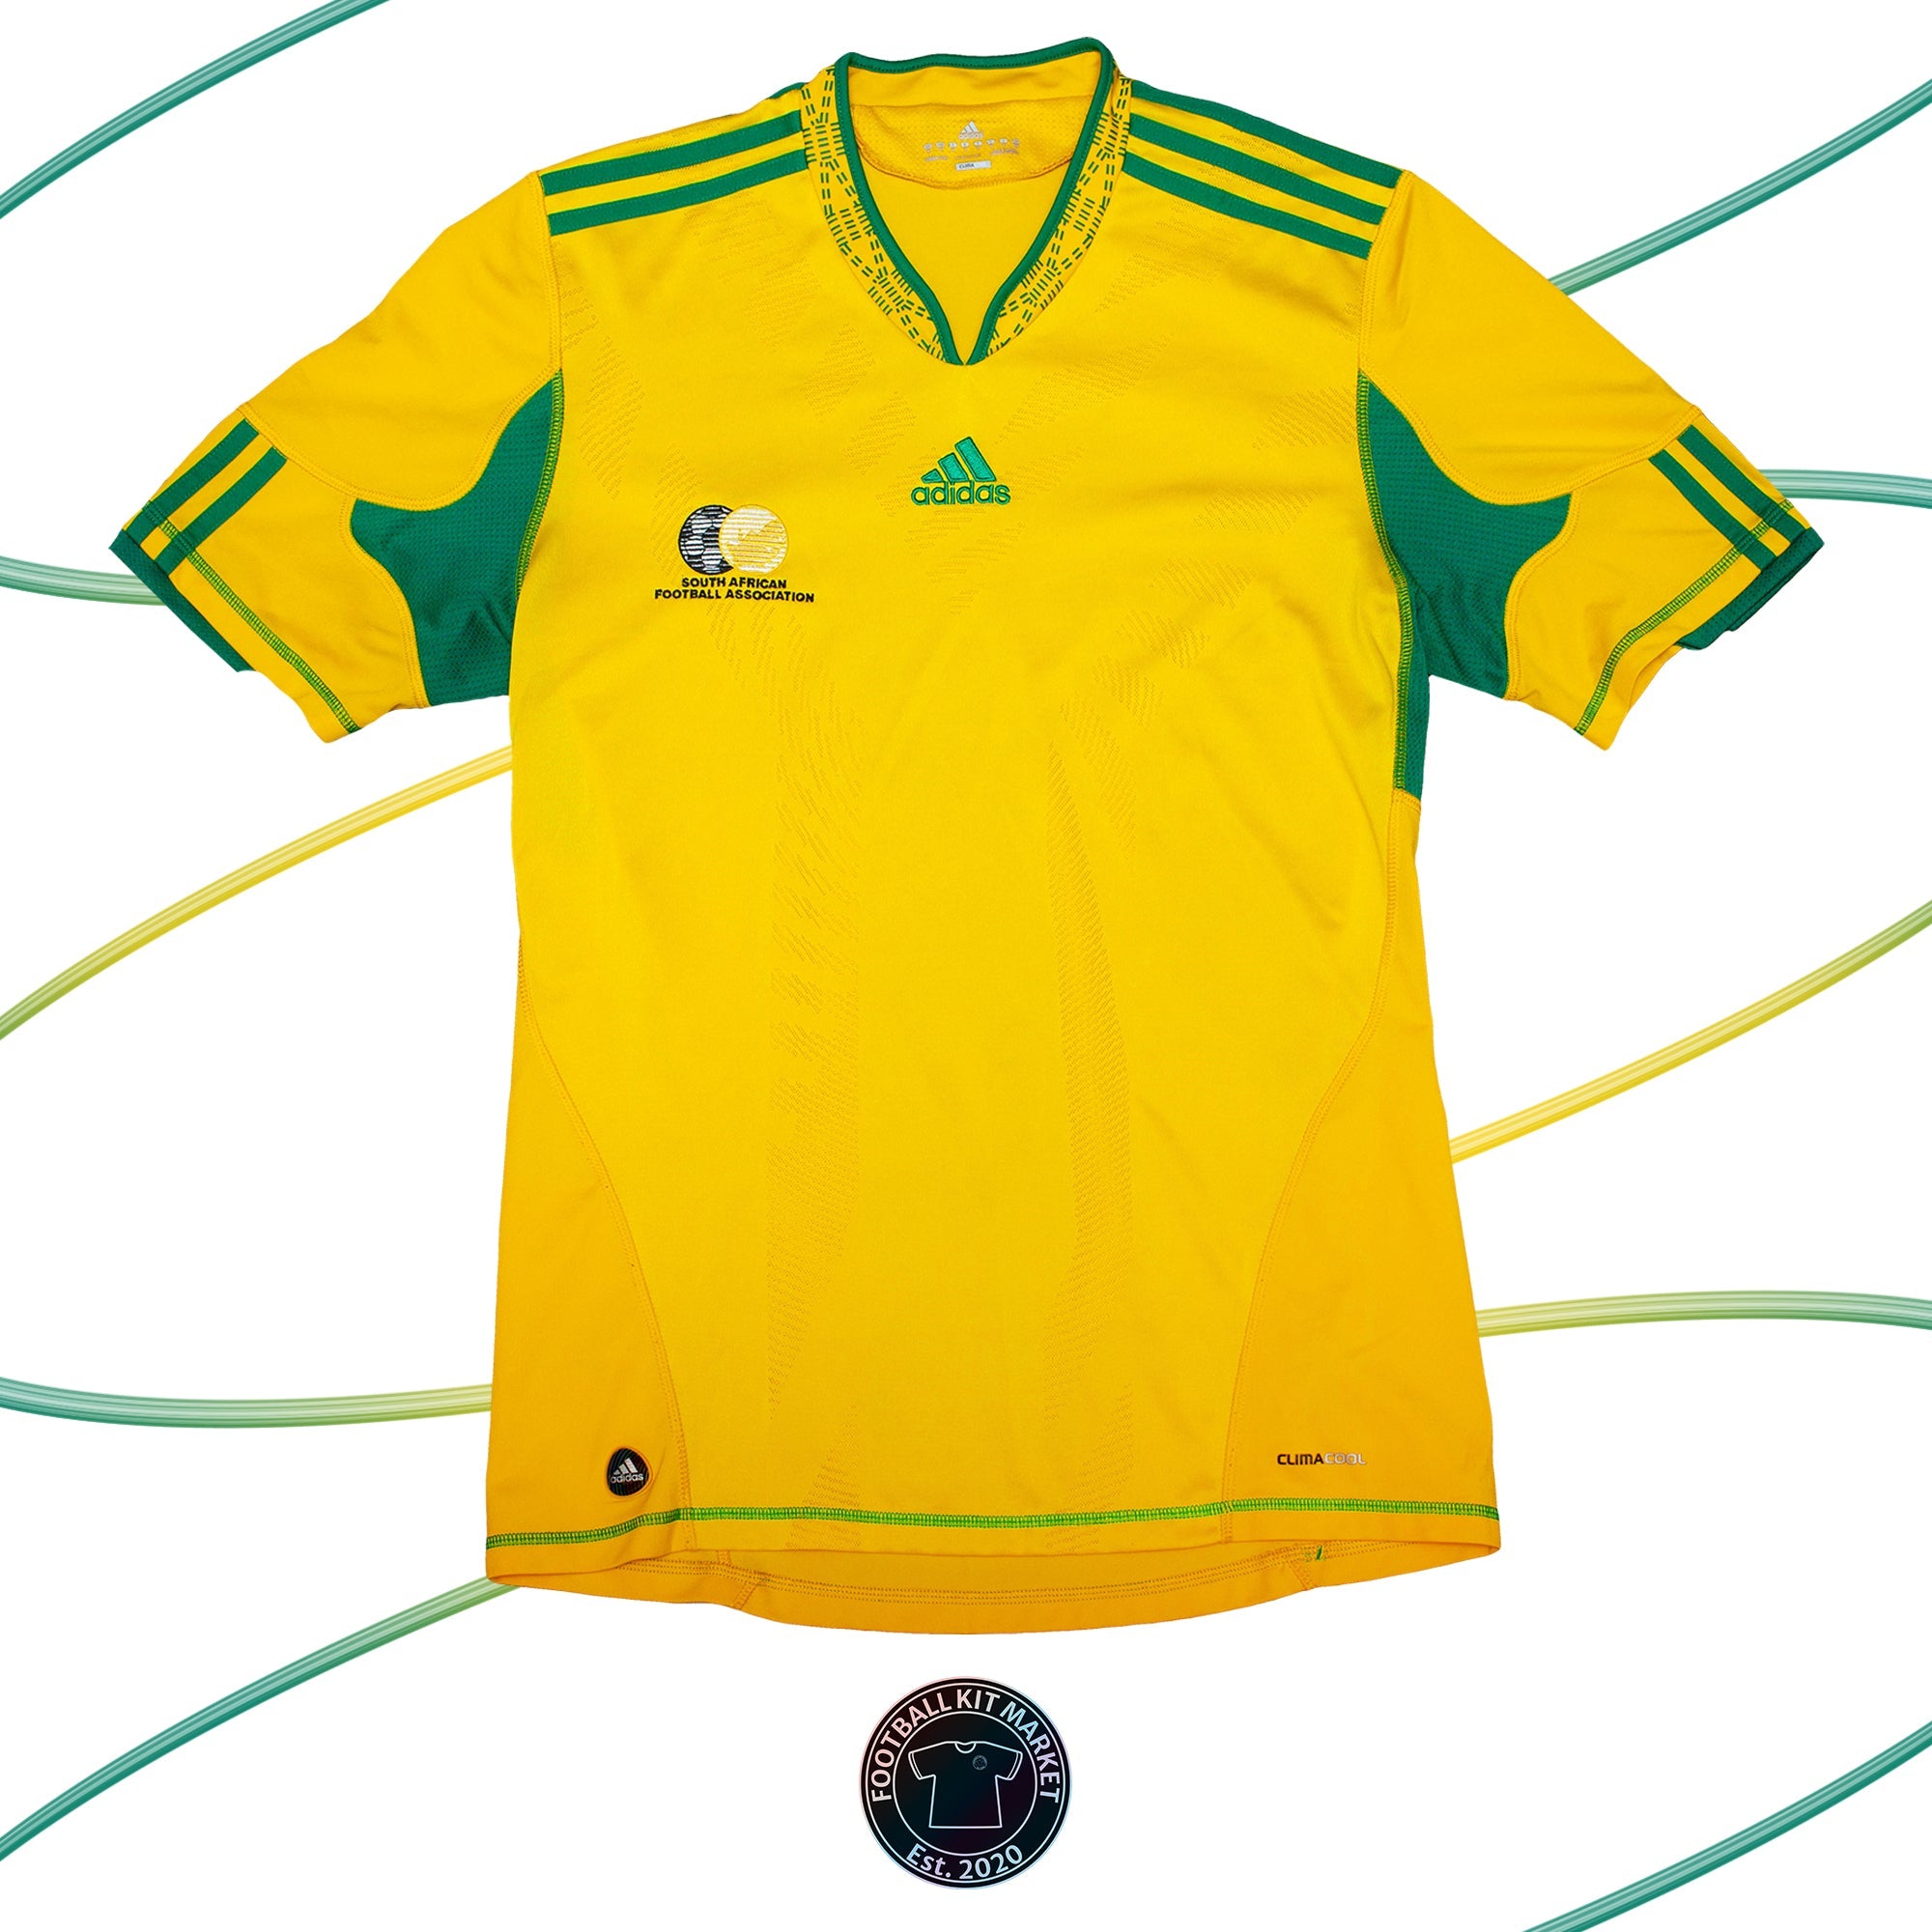 Genuine SOUTH AFRICA Home Shirt (2010-2011) - ADIDAS (M) - Product Image from Football Kit Market